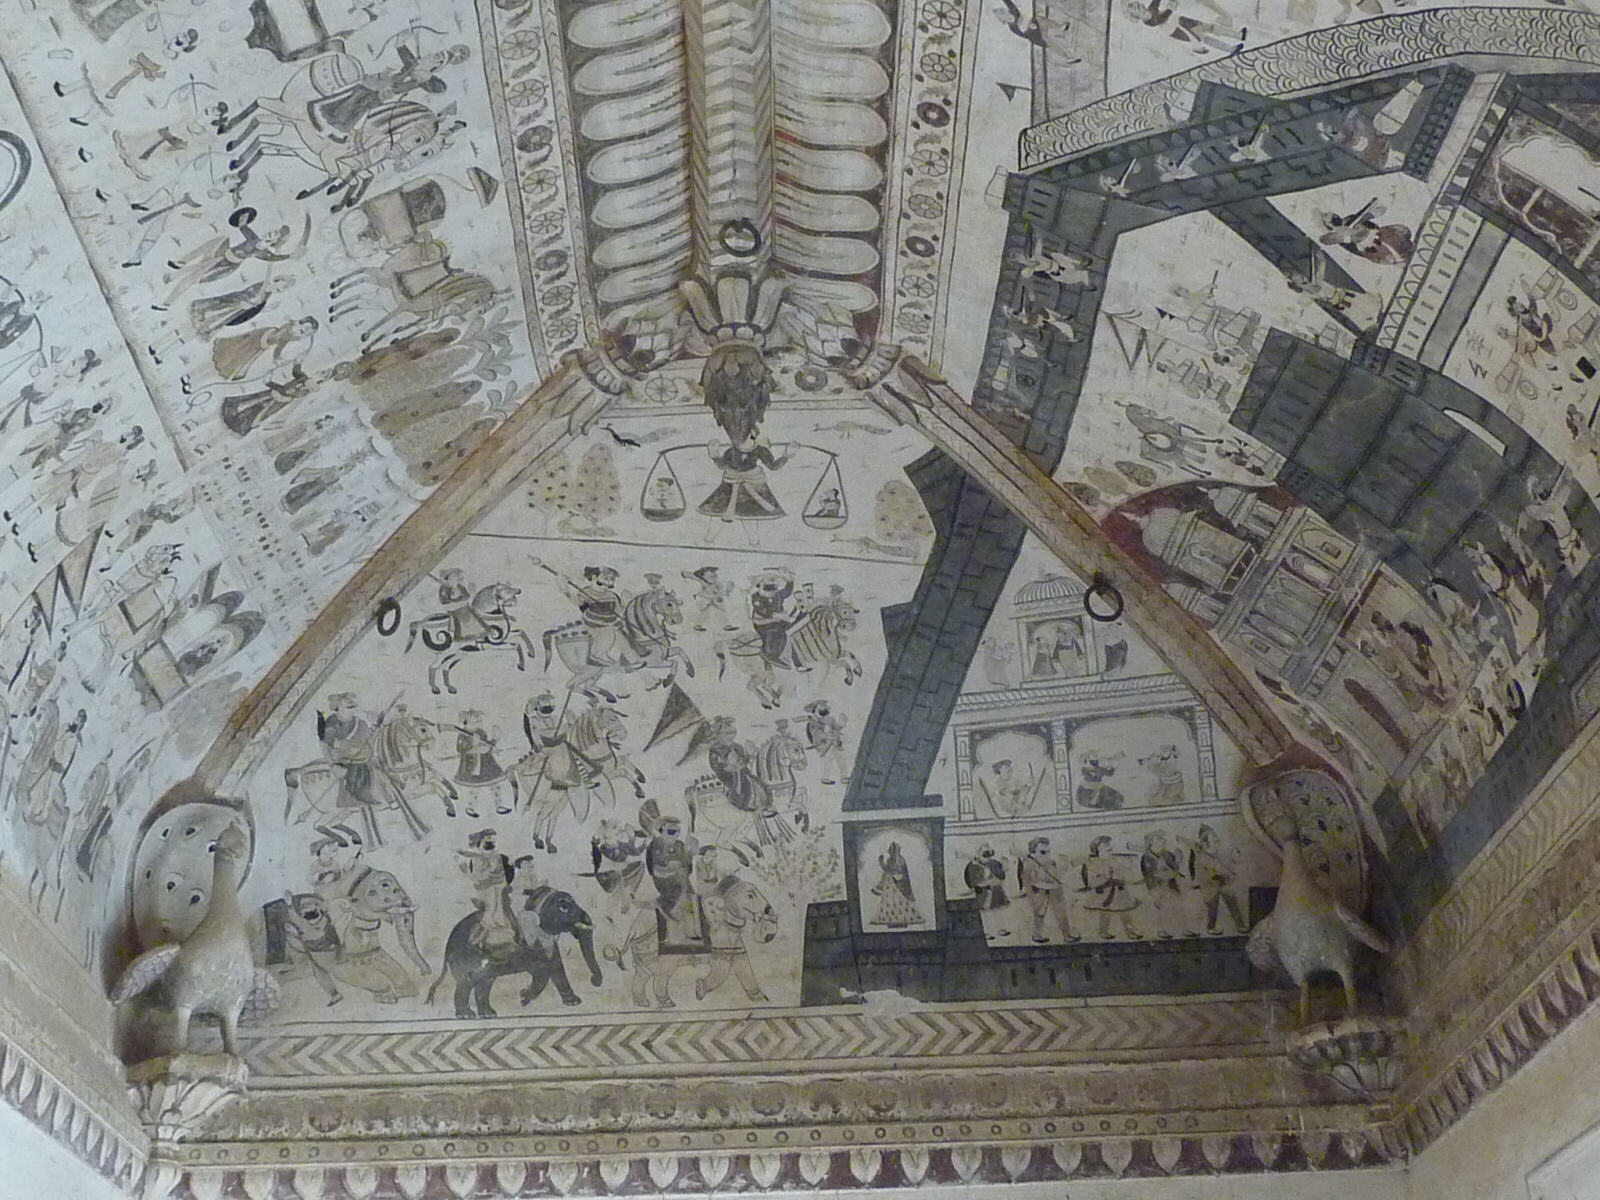 Painted ceilings in Laxminarayan temple, Orchha, India